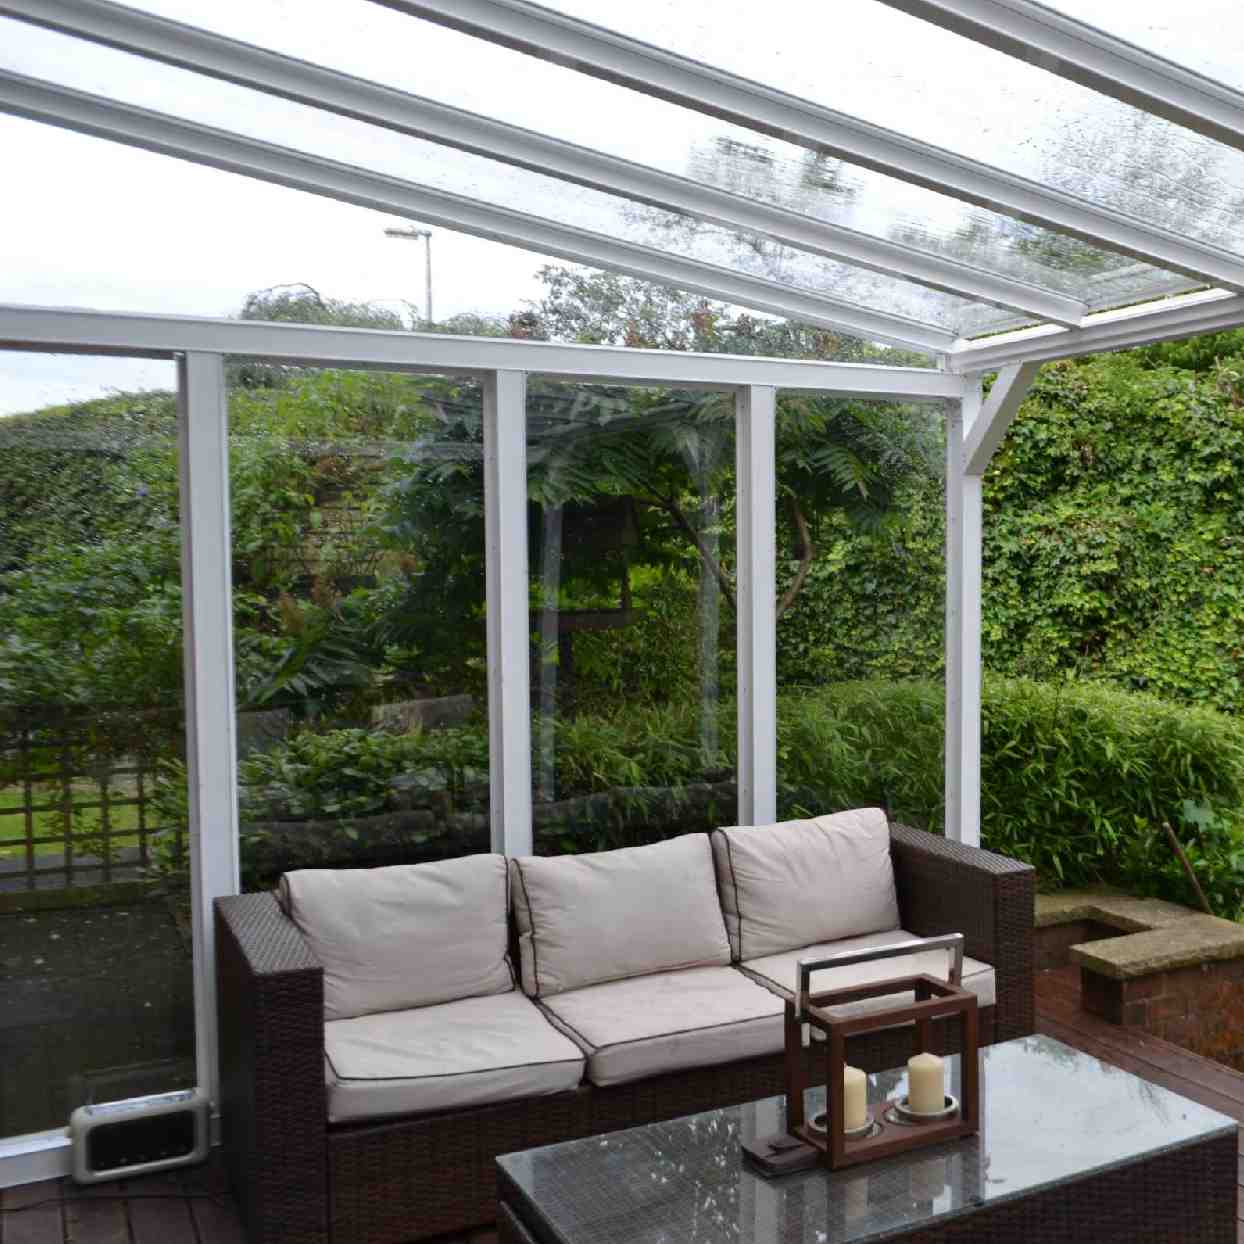 Buy Omega Verandah White with 6mm Glass Clear Plate Polycarbonate Glazing - 9.1m (W) x 2.5m (P), (5) Supporting Posts online today